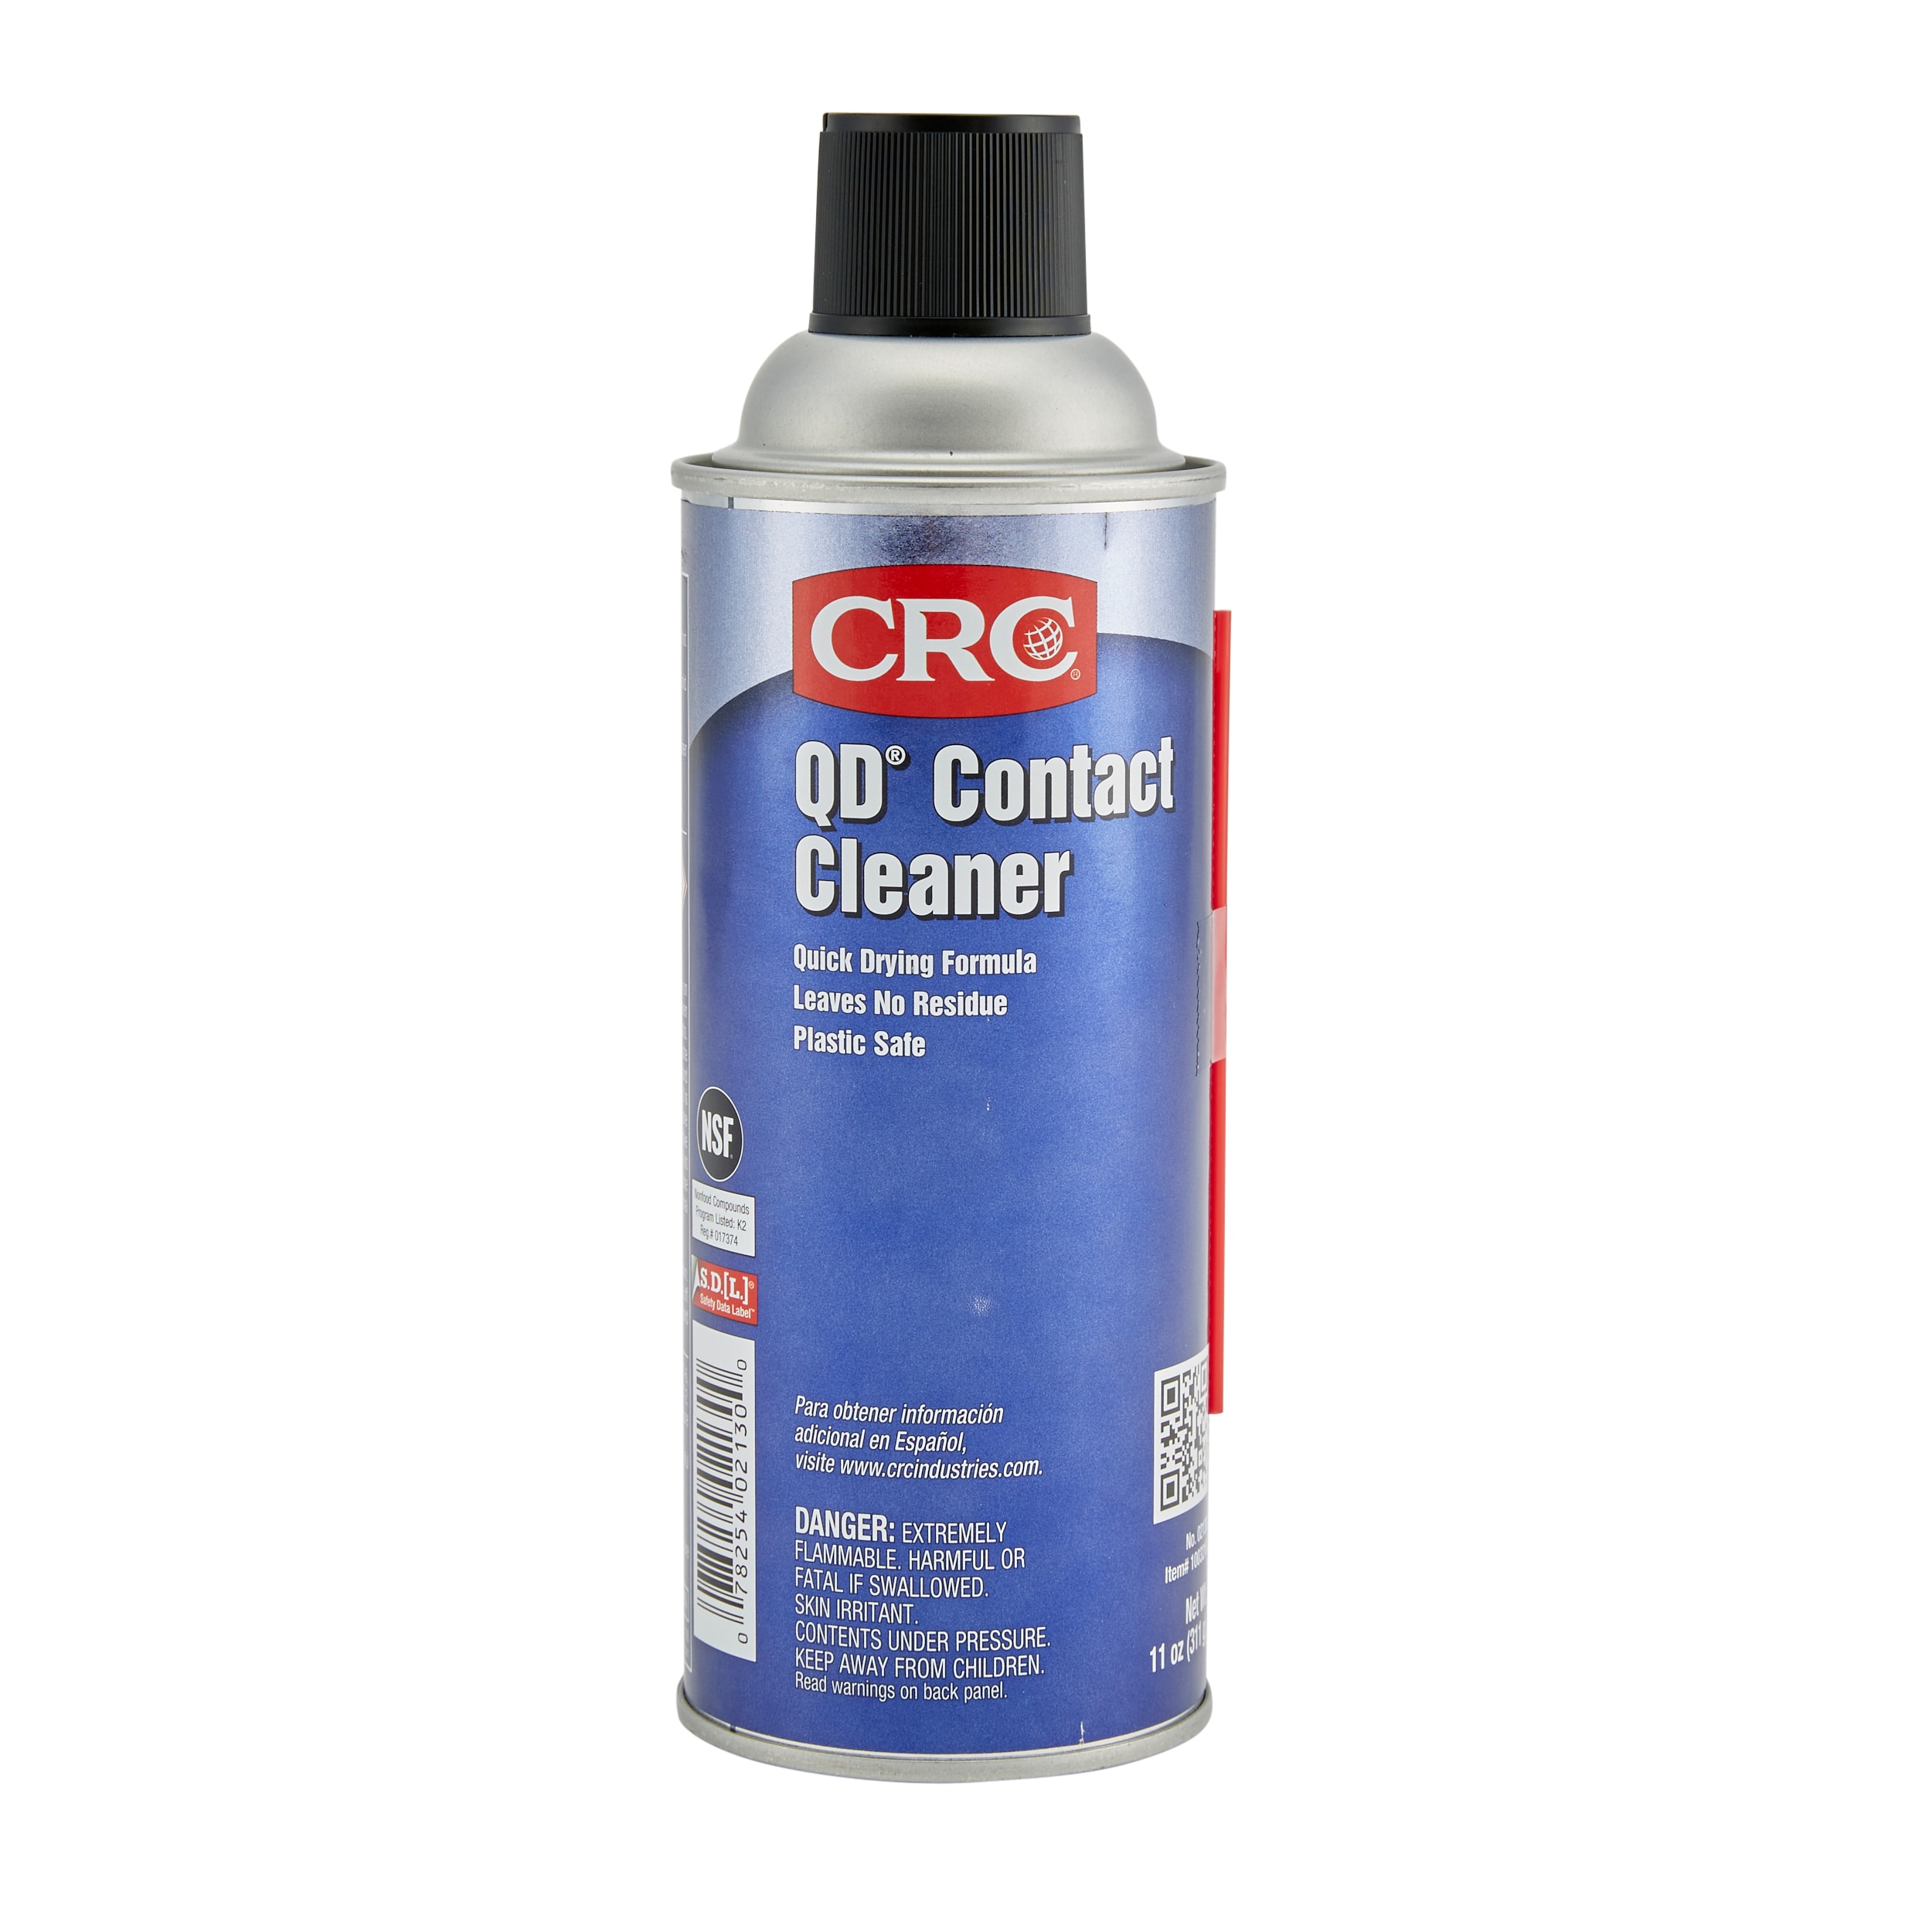 CRC Contact Cleaner, Chemical Maintenance Application, 11 oz., QD®